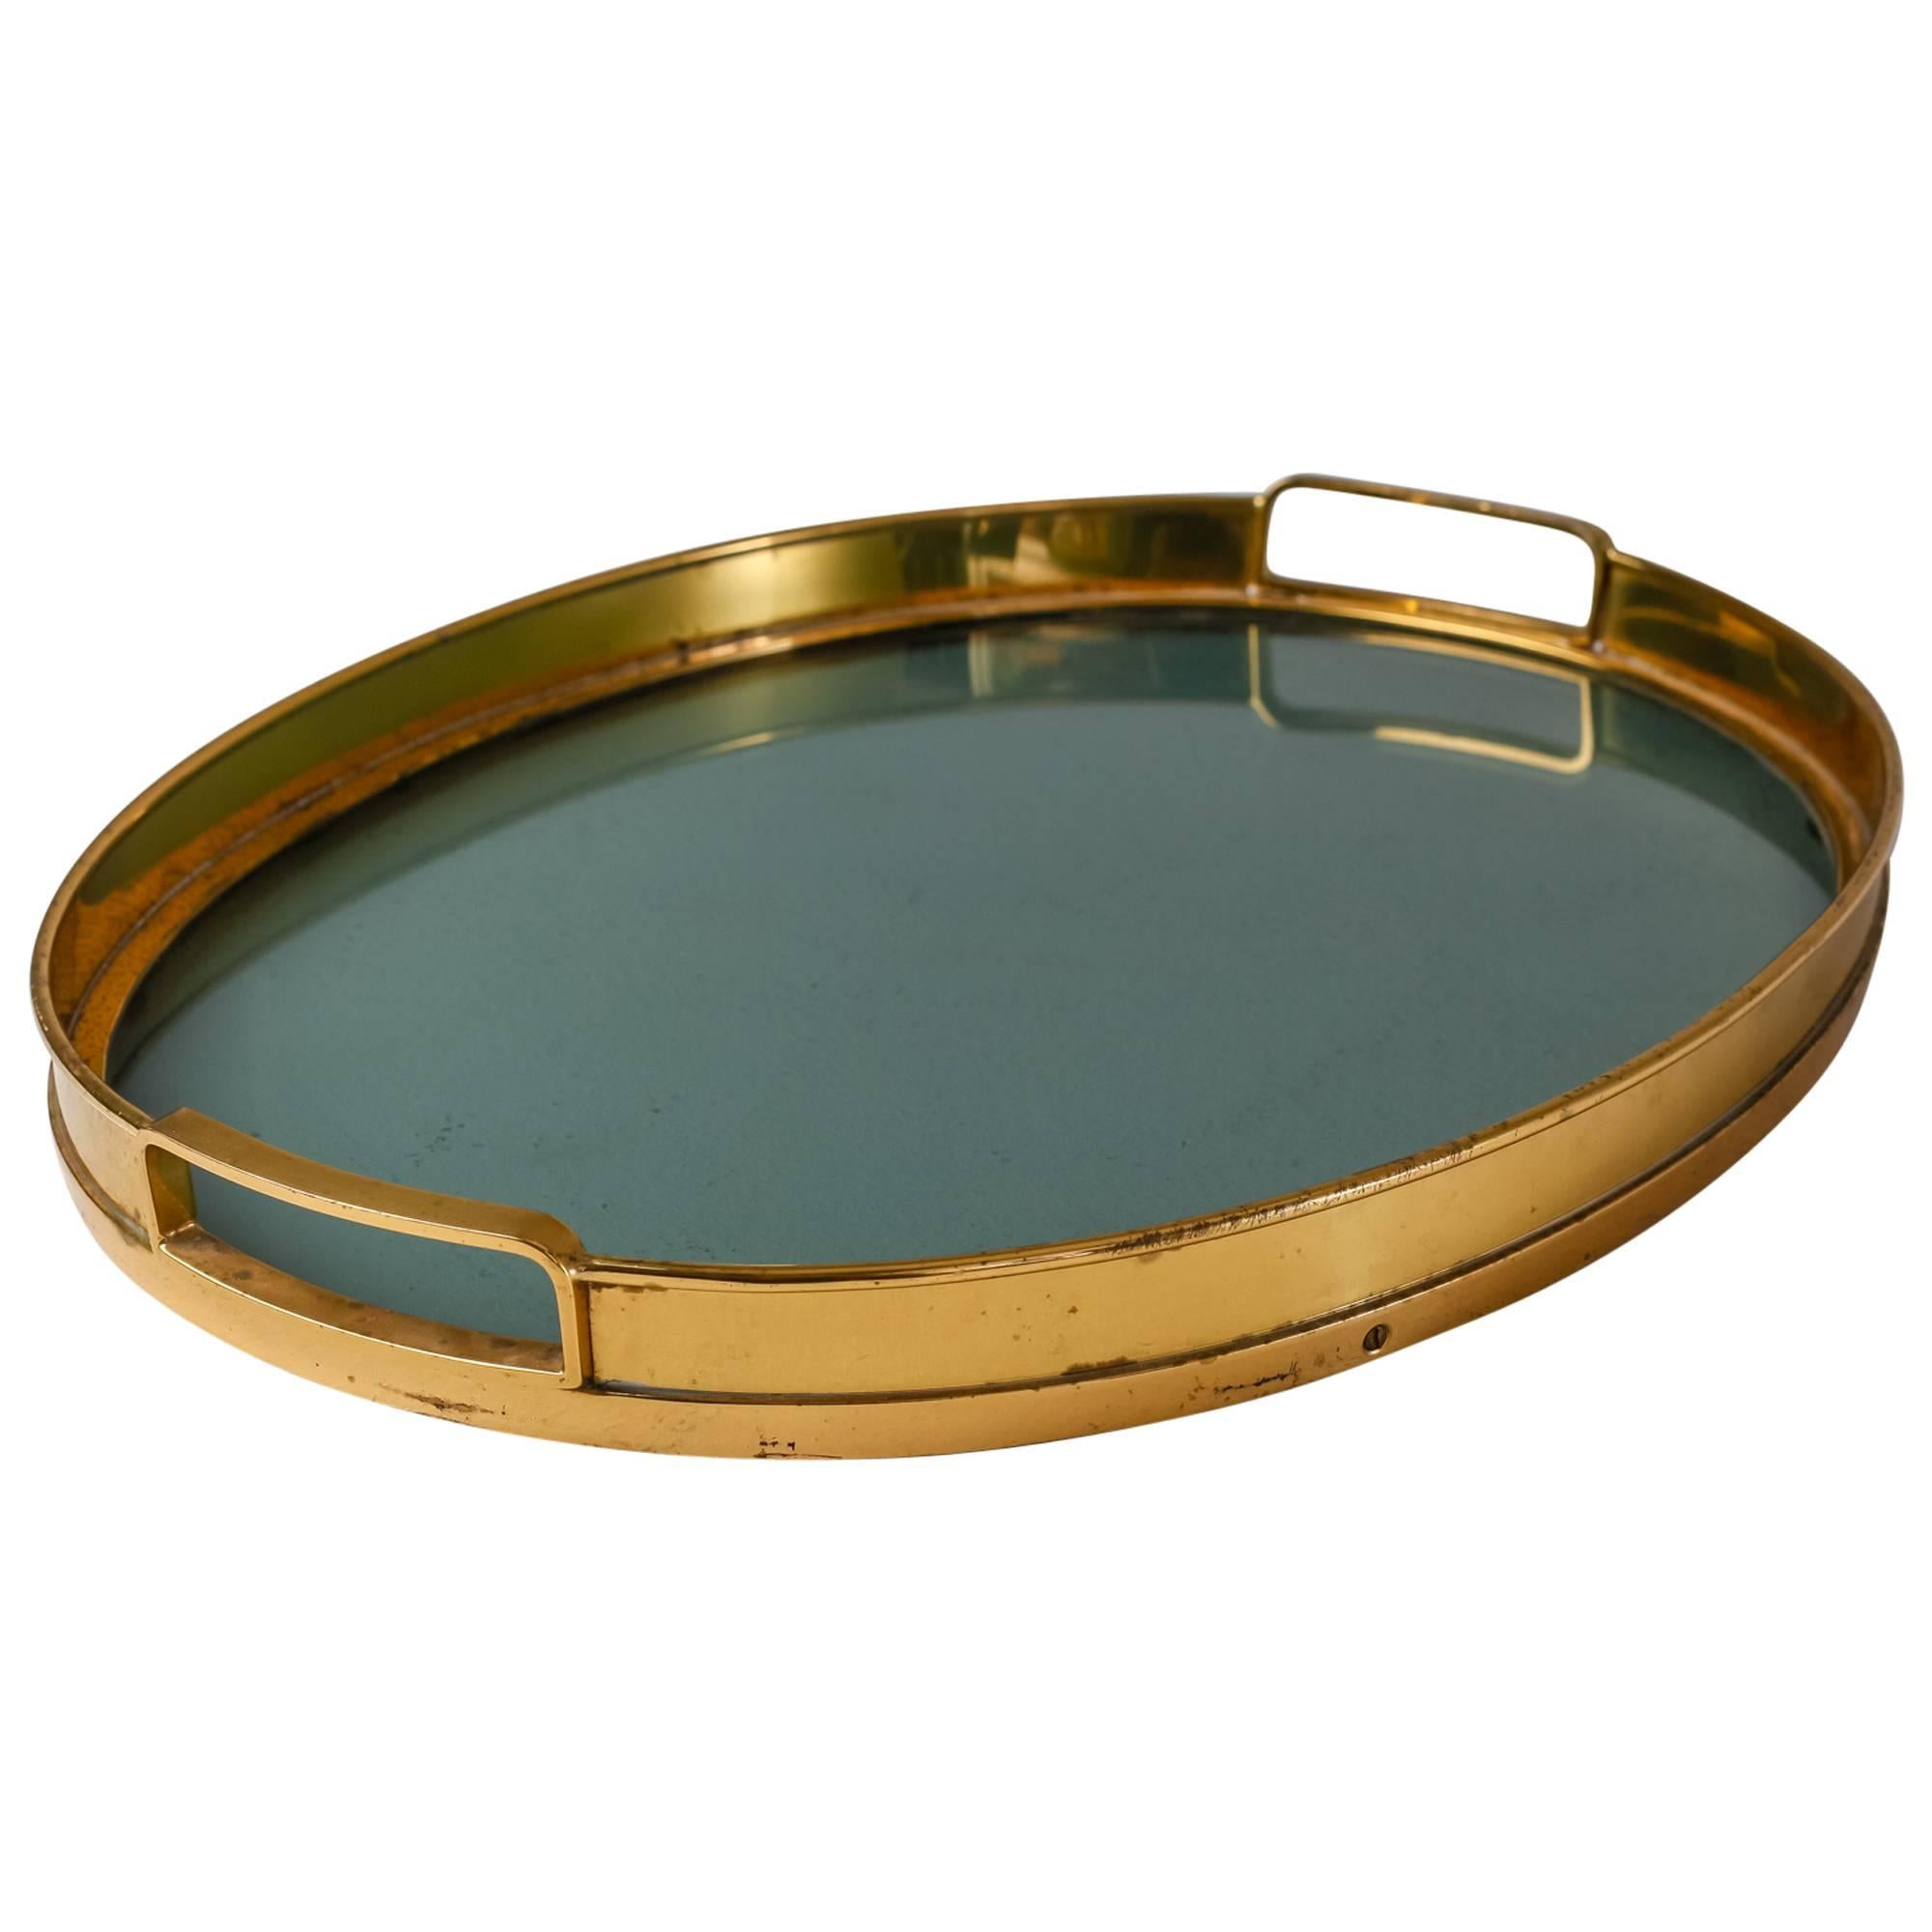 Tray with Brass Rim and Glass Bottom, Italy, 1950s